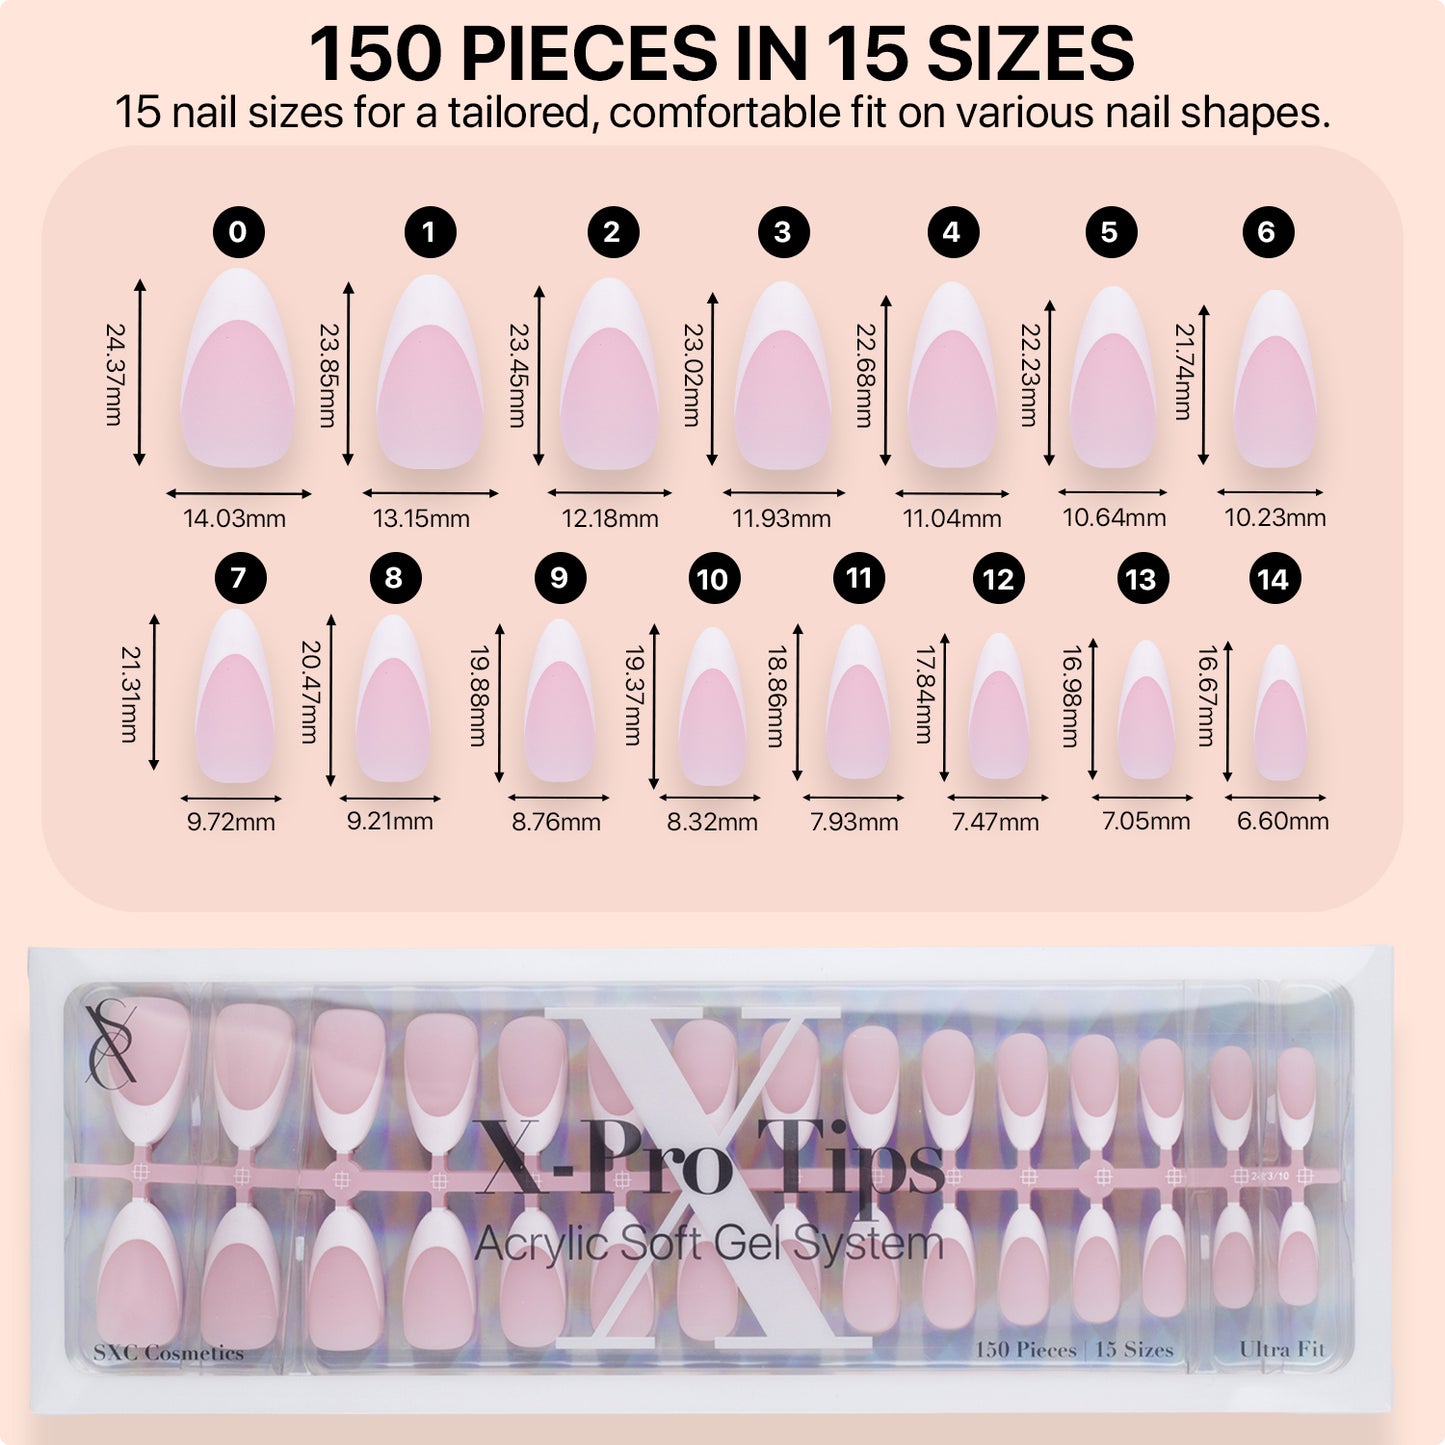 SXC Cosmetics X-Pro Tips Press on Nails, Pink Medium Almond French Tips, 150 Pieces in 15 Sizes Ultra Fit Acrylic Soft Gel System